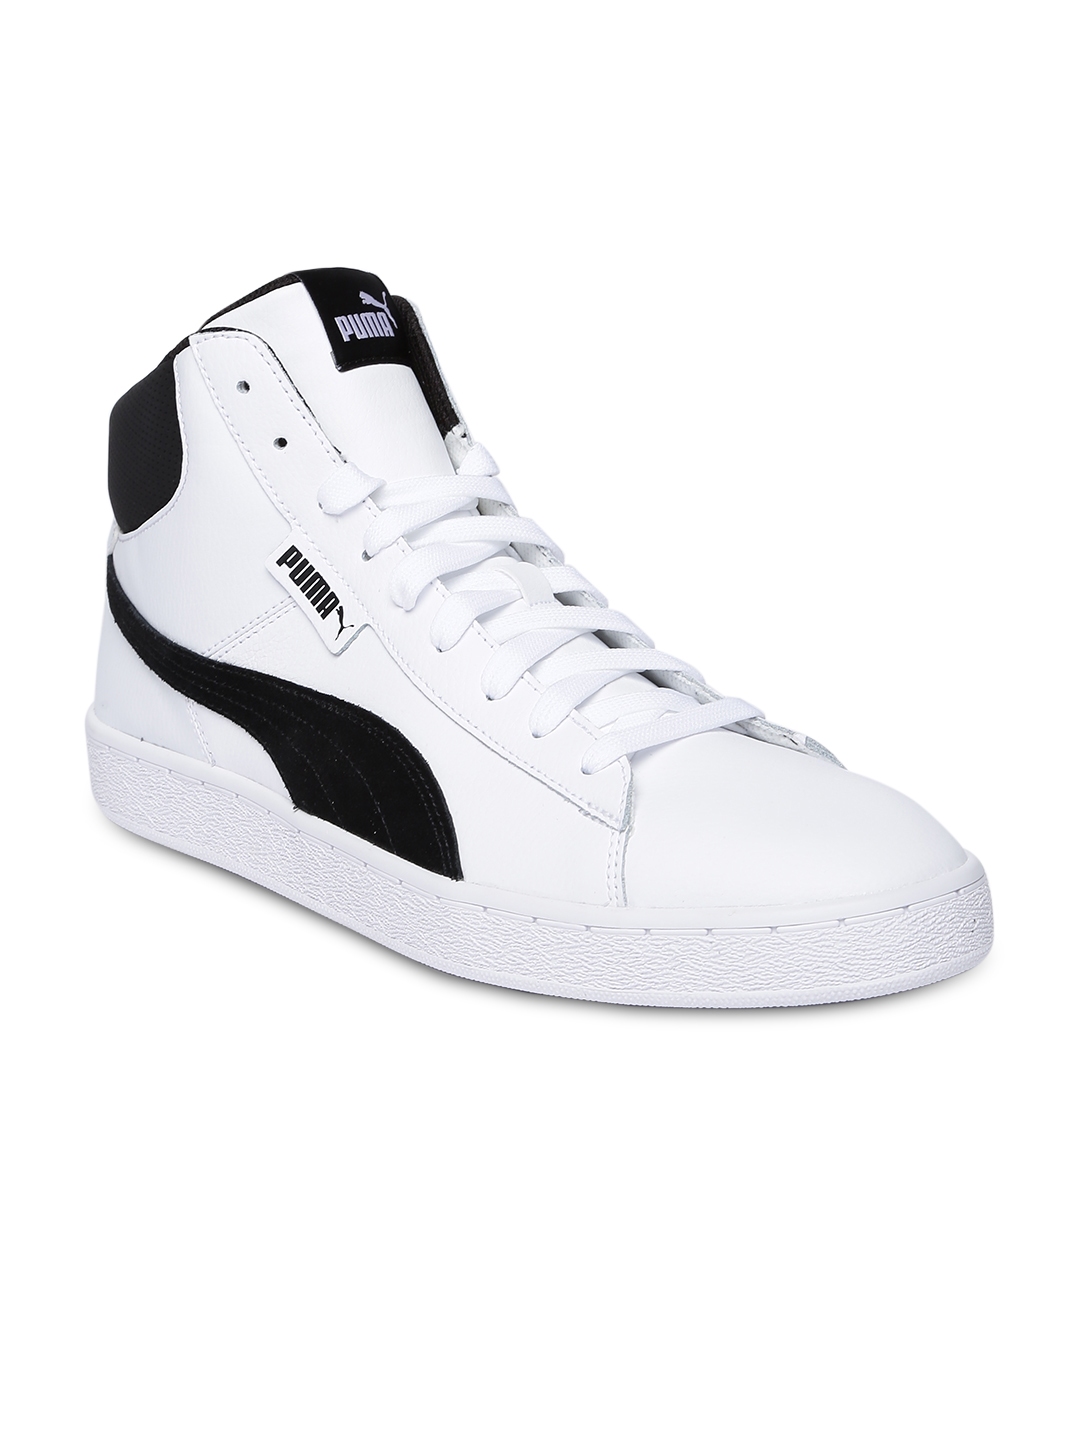 Buy Puma Men White 1948 Mid L Top Leather Sneakers - Shoes for Men 7252444 | Myntra